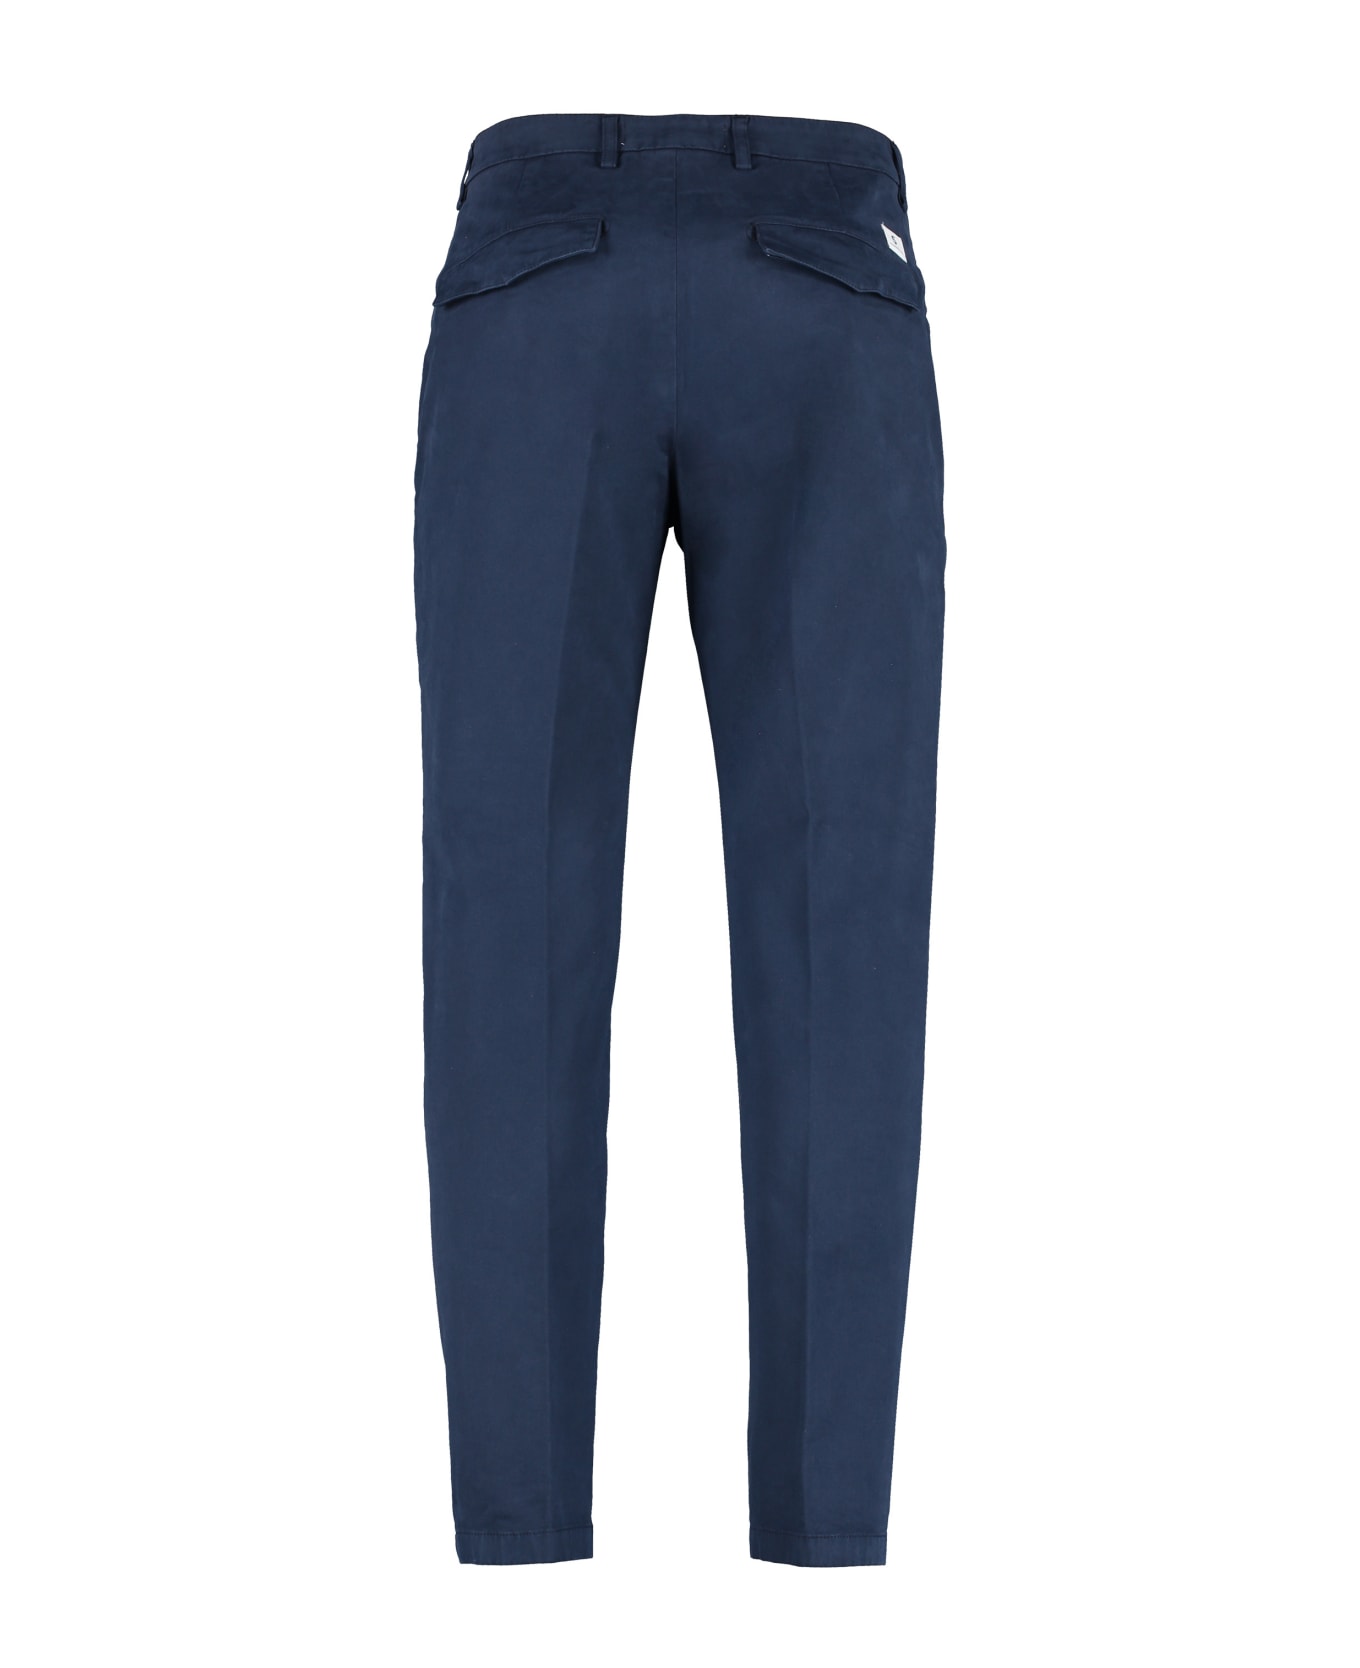 Department Five Prince Cotton Chino Trousers - blue